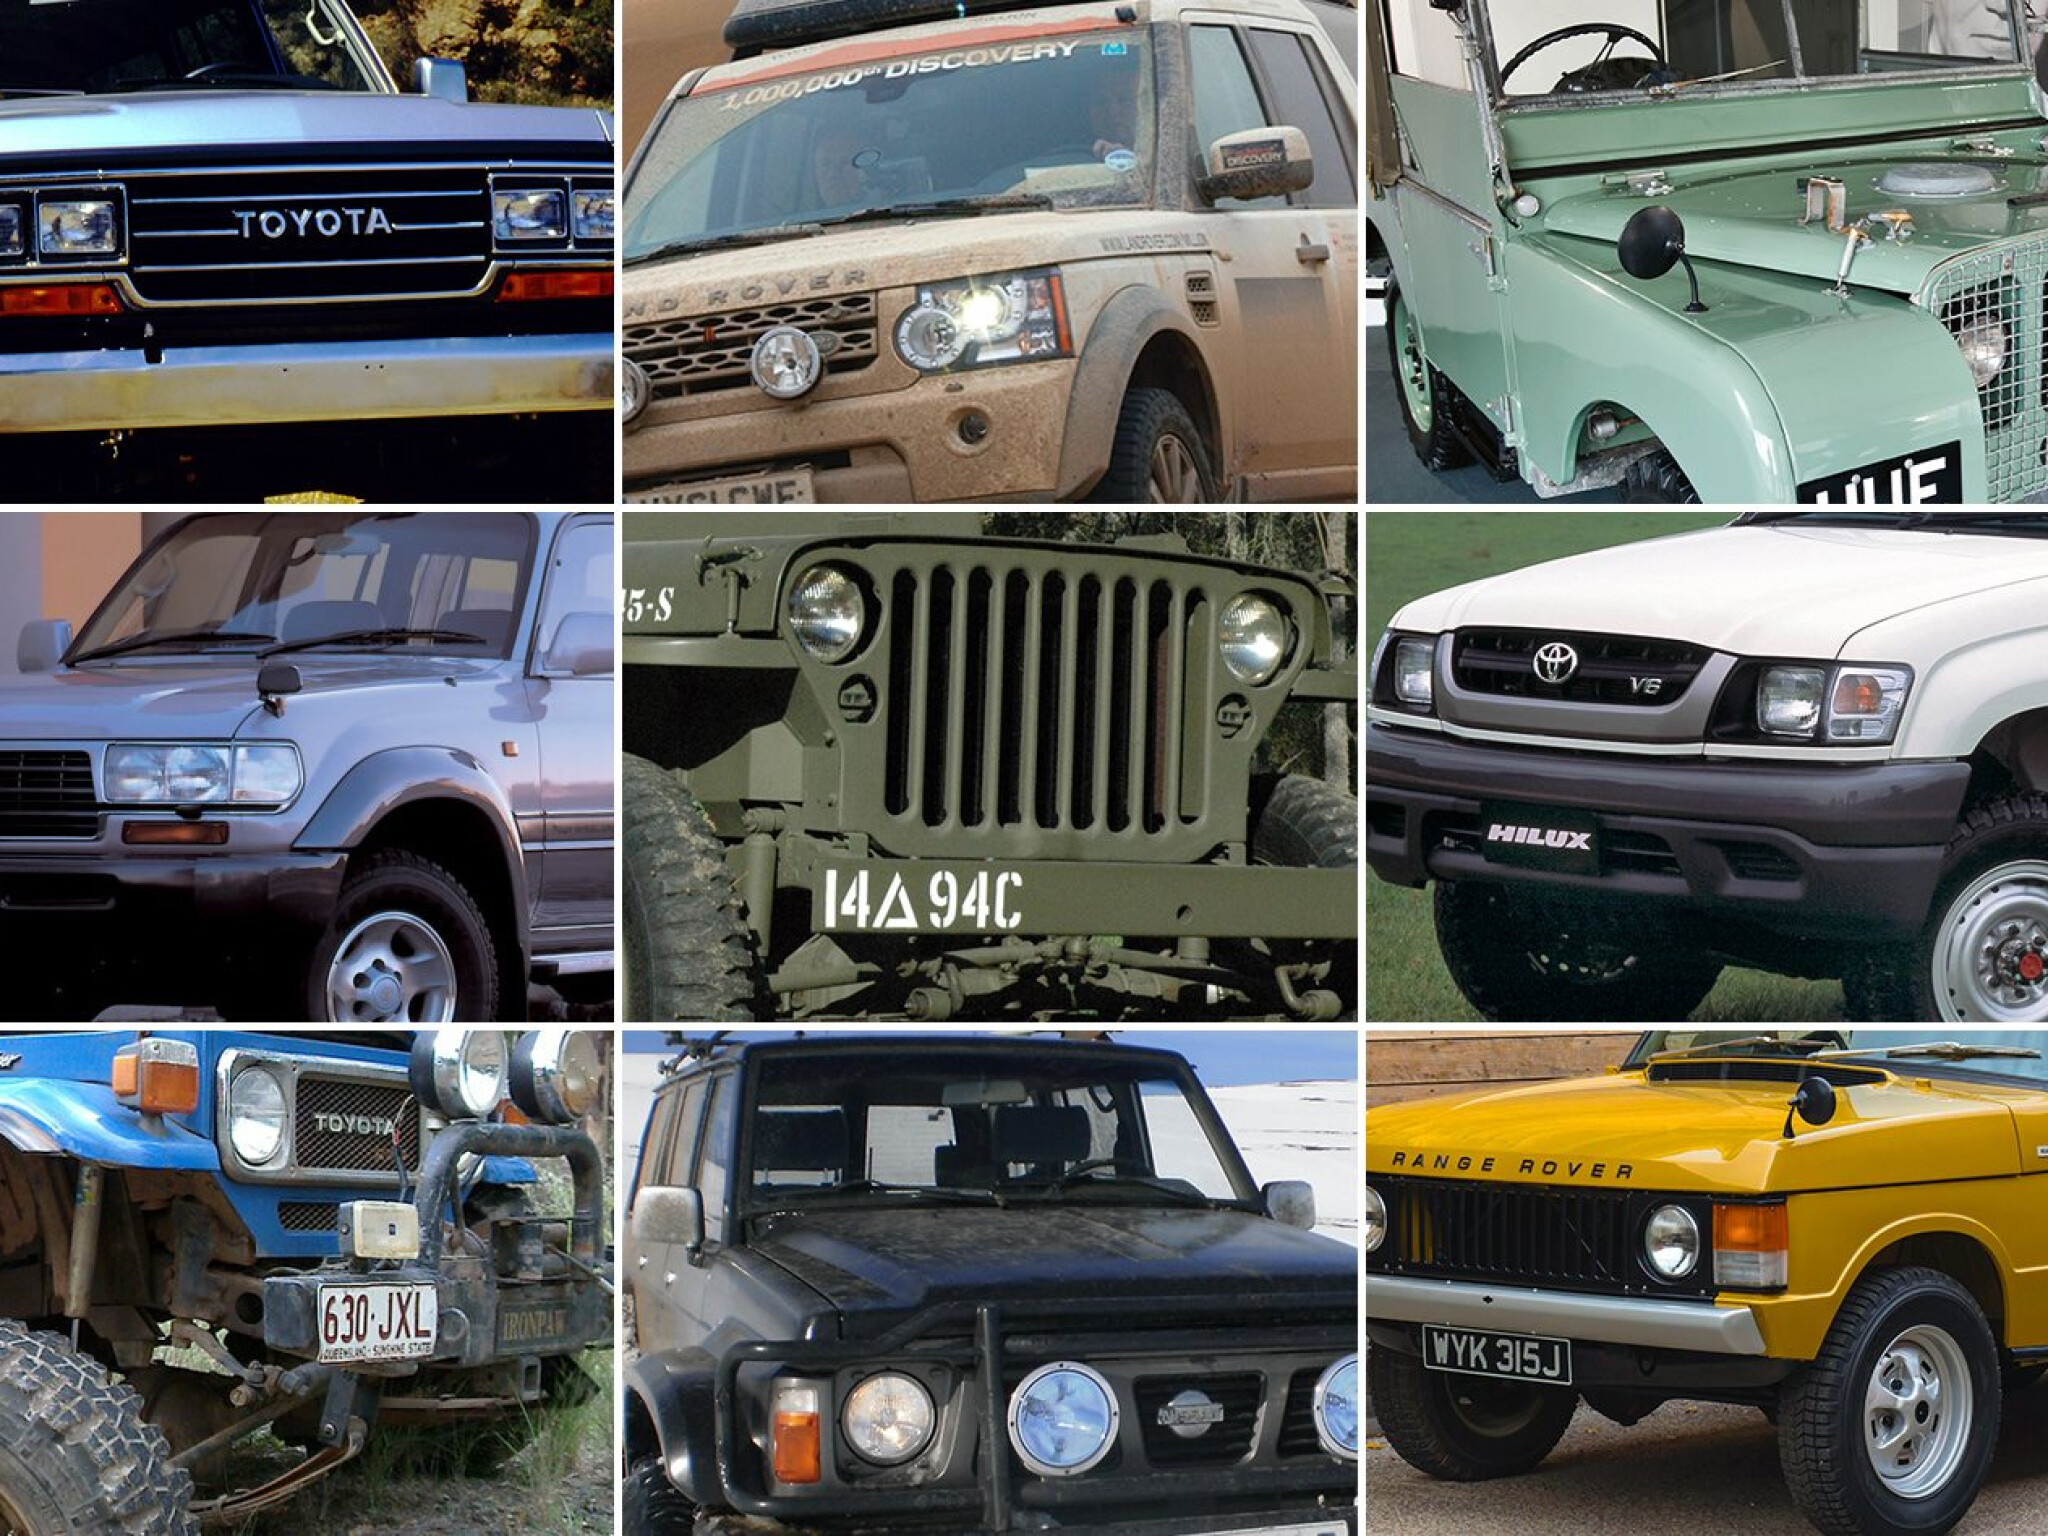 Ford-for-All: These Are the 20 Best Ford Cars of All Time